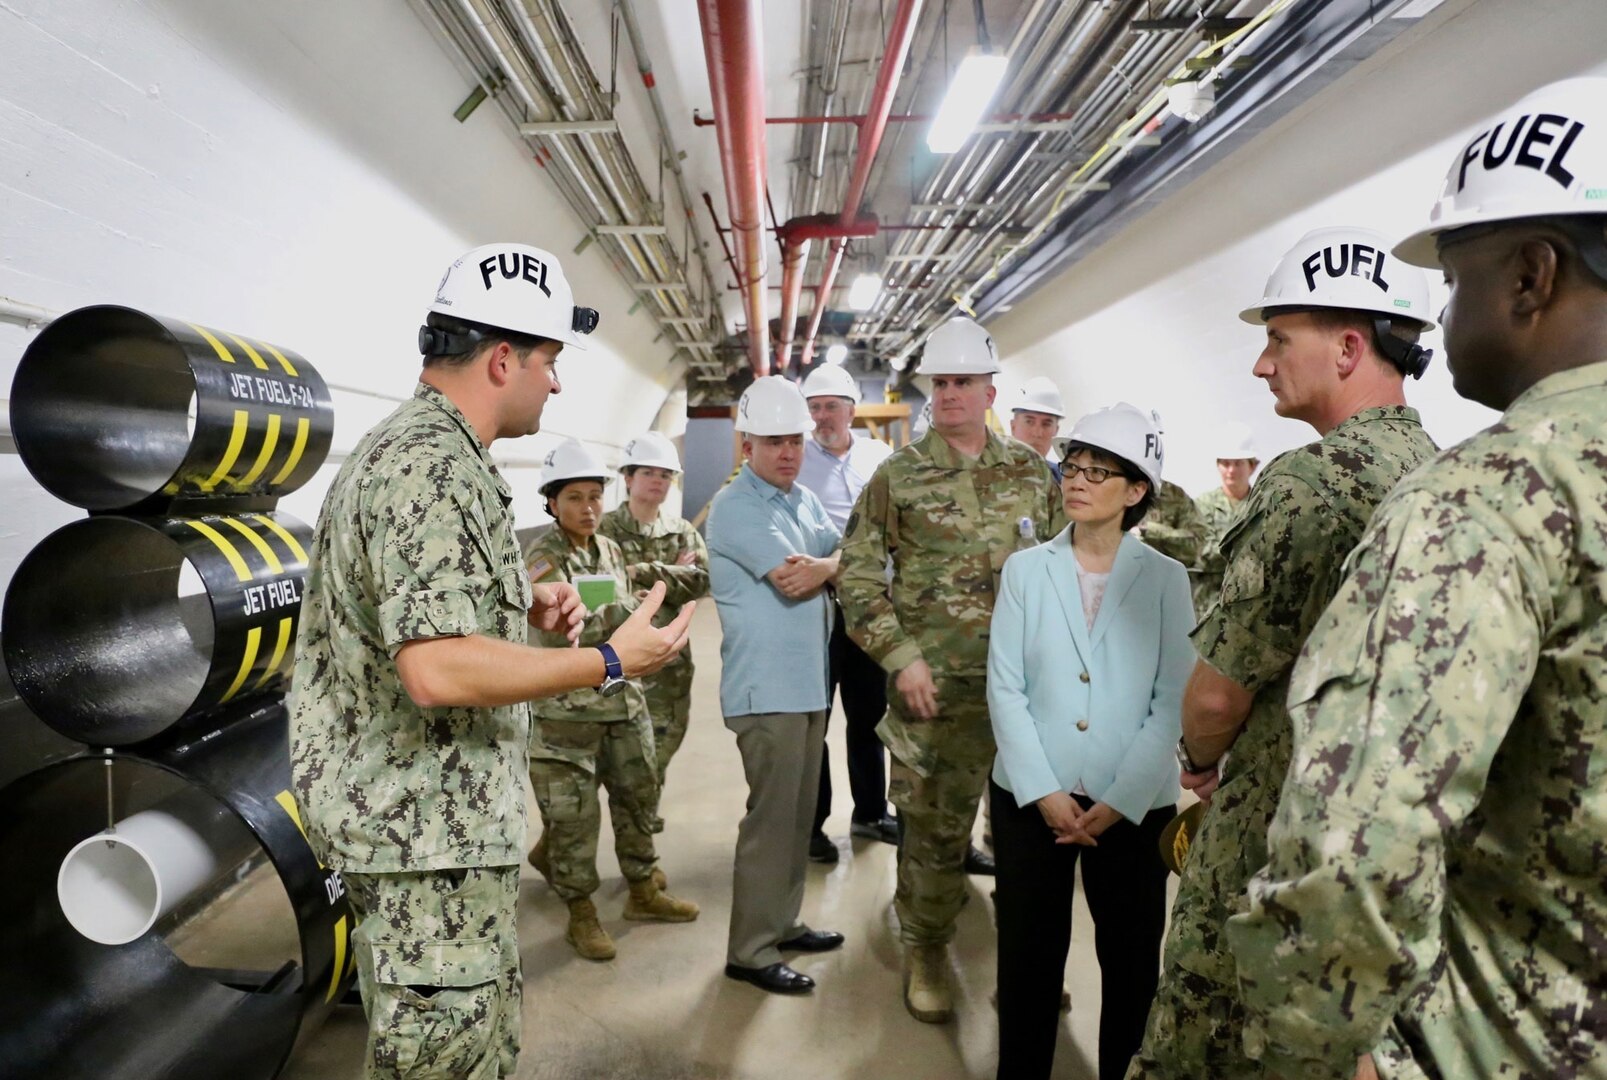 A group of people tour an underground fuel storage facility.